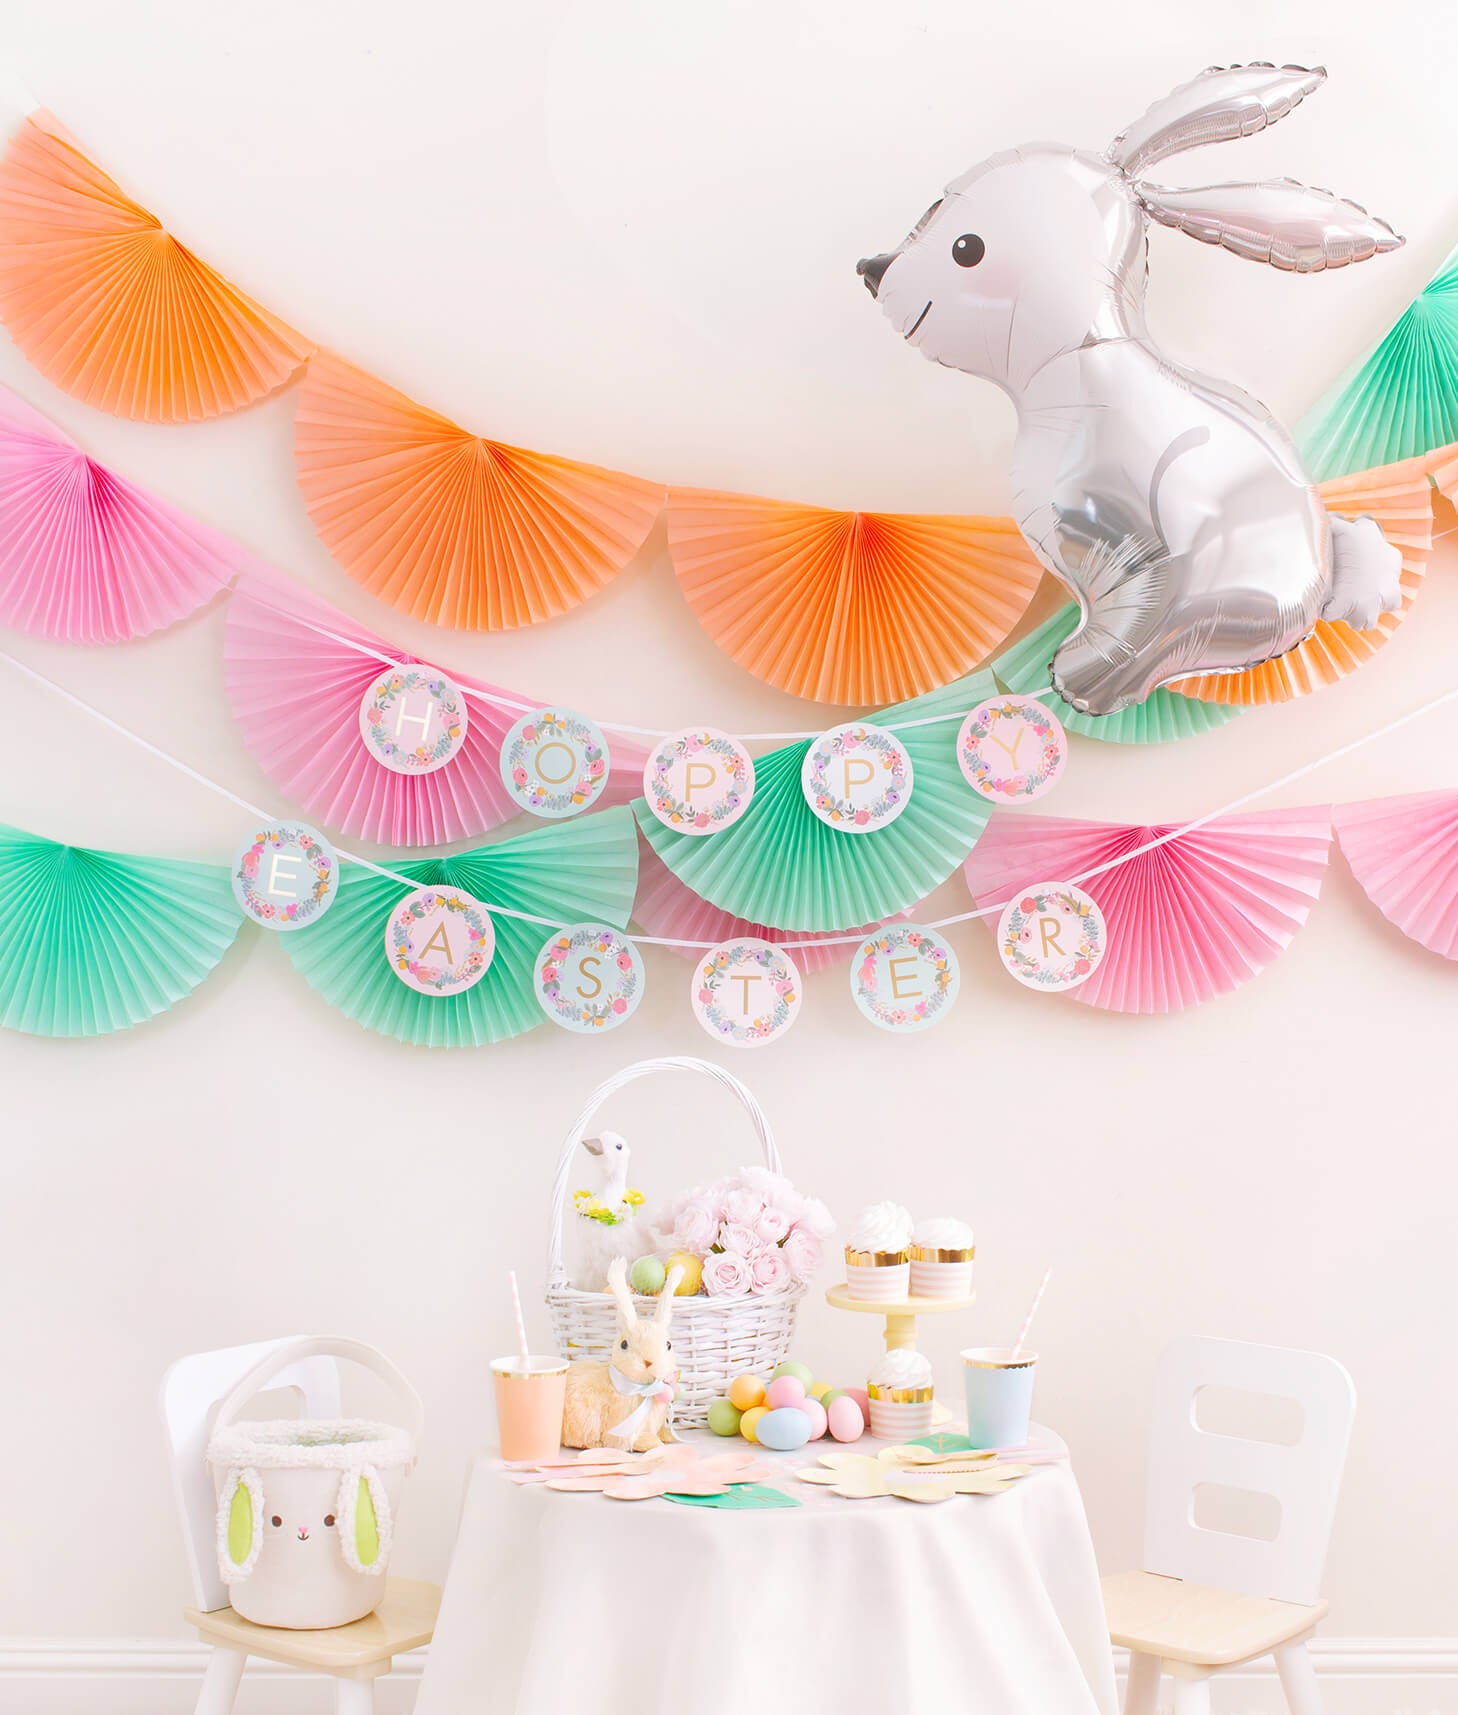 Momo Party Easter Party celebration box with Bunting Fan Garlands, Rifle Paper Garden Party Letter Garland, Woodland Bunny Foil Mylar Balloon as decoration, and Pastel Daisy Large Plates, Pastel Cups, Leaf Napkins and Easter Basket for dessert table